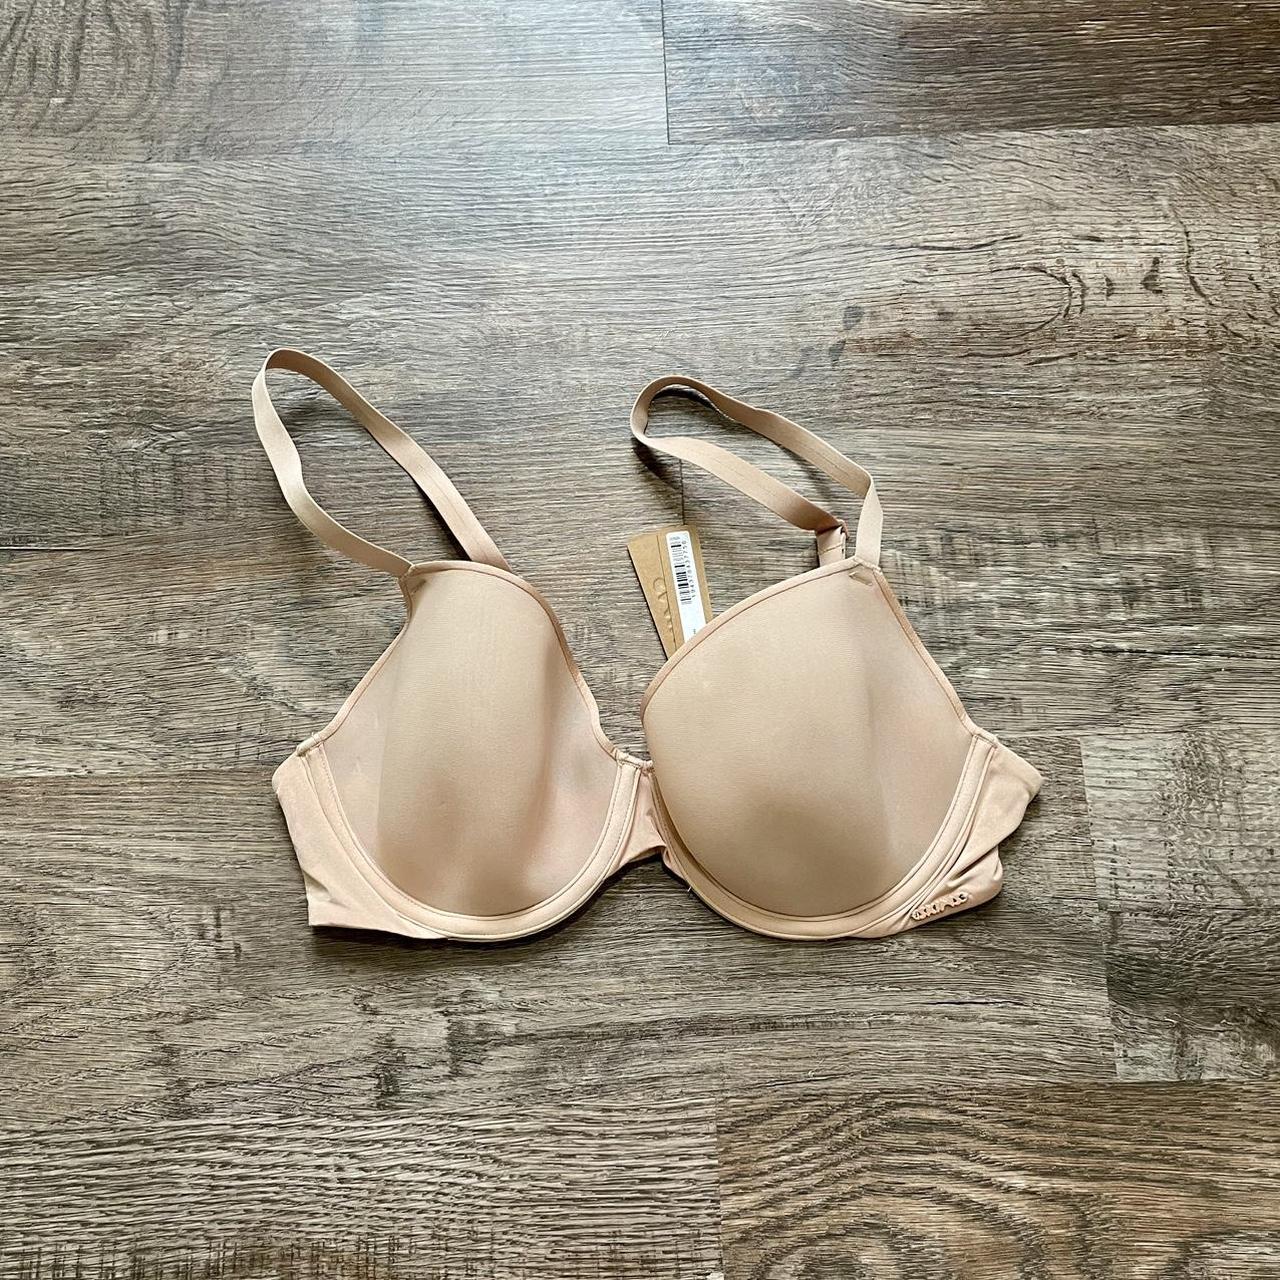 brand new with tags skims “weightless demi” bra in - Depop